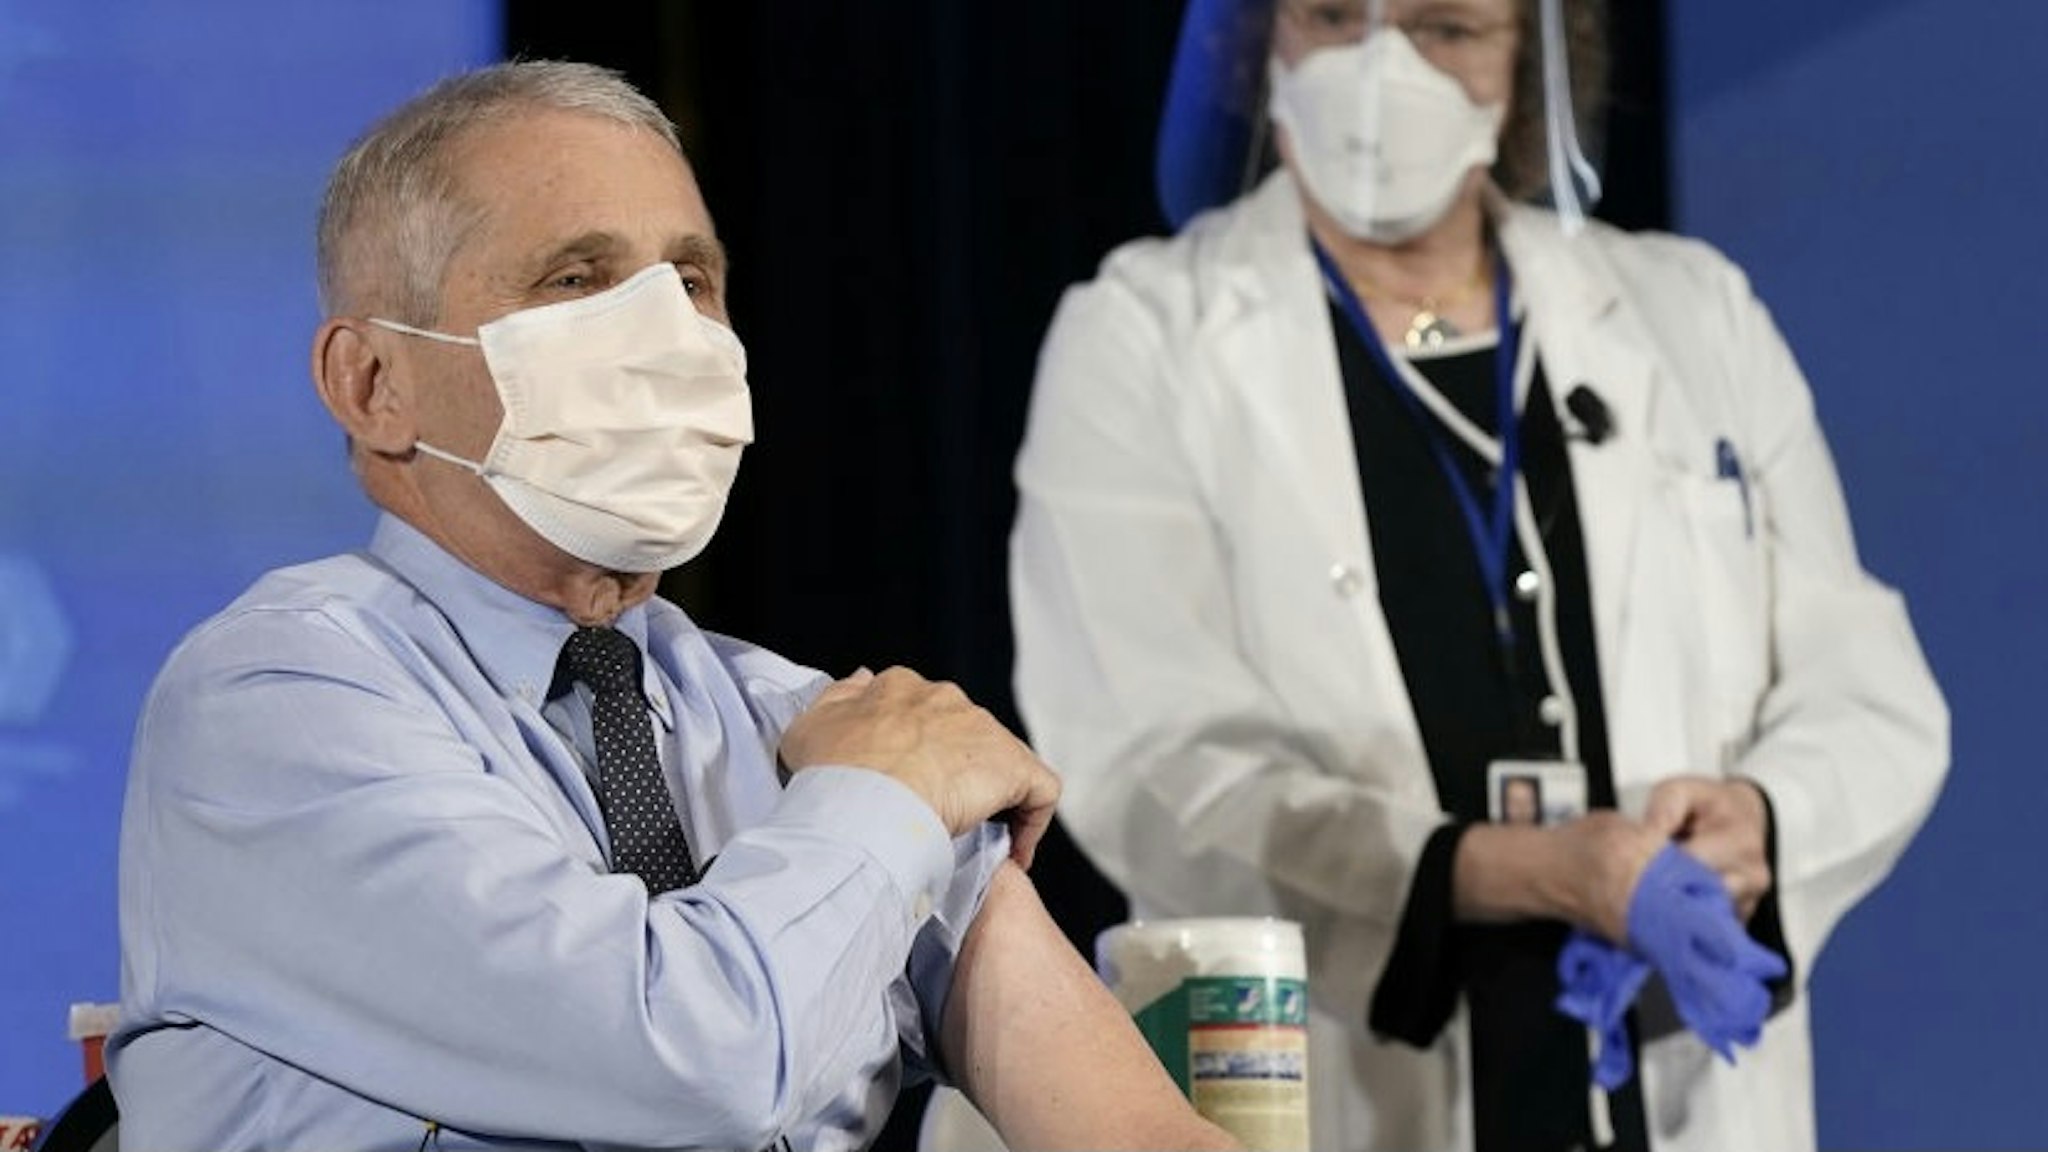 Anthony Fauci, director of the National Institute of Allergy and Infectious Diseases, left, speaks before receiving the Moderna Inc. Covid-19 vaccine during an event at the NIH Clinical Center Masur Auditorium in Bethesda, Maryland, U.S., on Tuesday, Dec, 22, 2020. The National Institutes of Health is holding a livestreamed vaccination event to kick-off the organization's efforts for its employees on the front line of the pandemic. Photographer: Patrick Semansky/Associated Press/Bloomberg